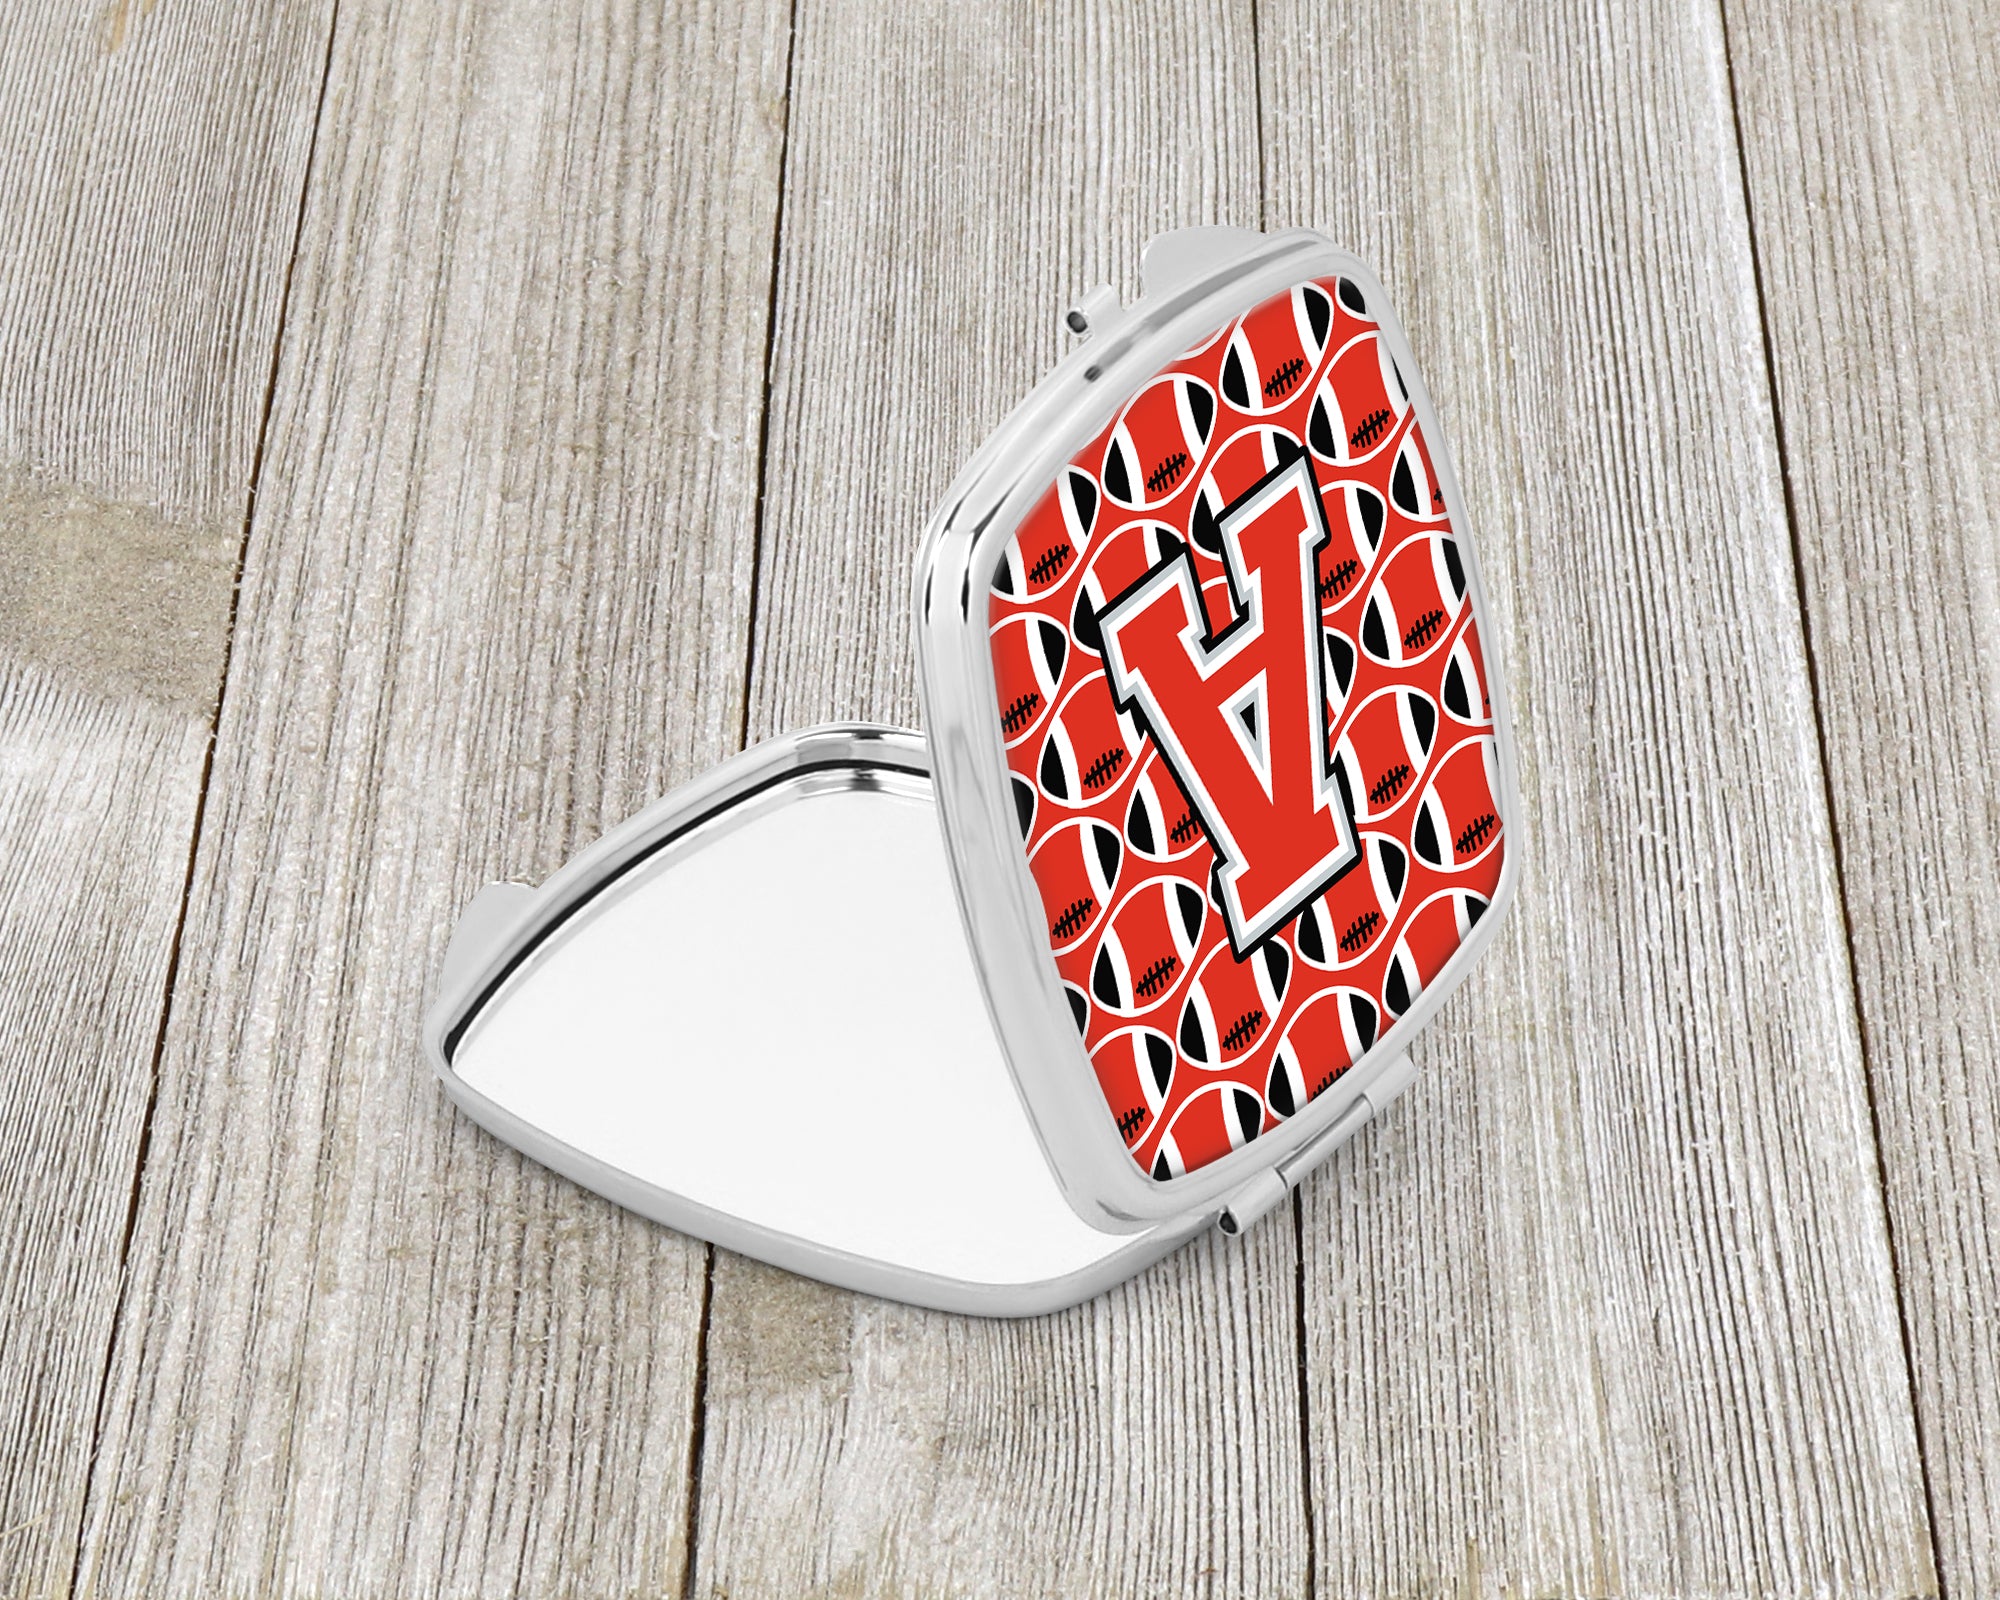 Letter A Football Scarlet and Grey Compact Mirror CJ1067-ASCM  the-store.com.